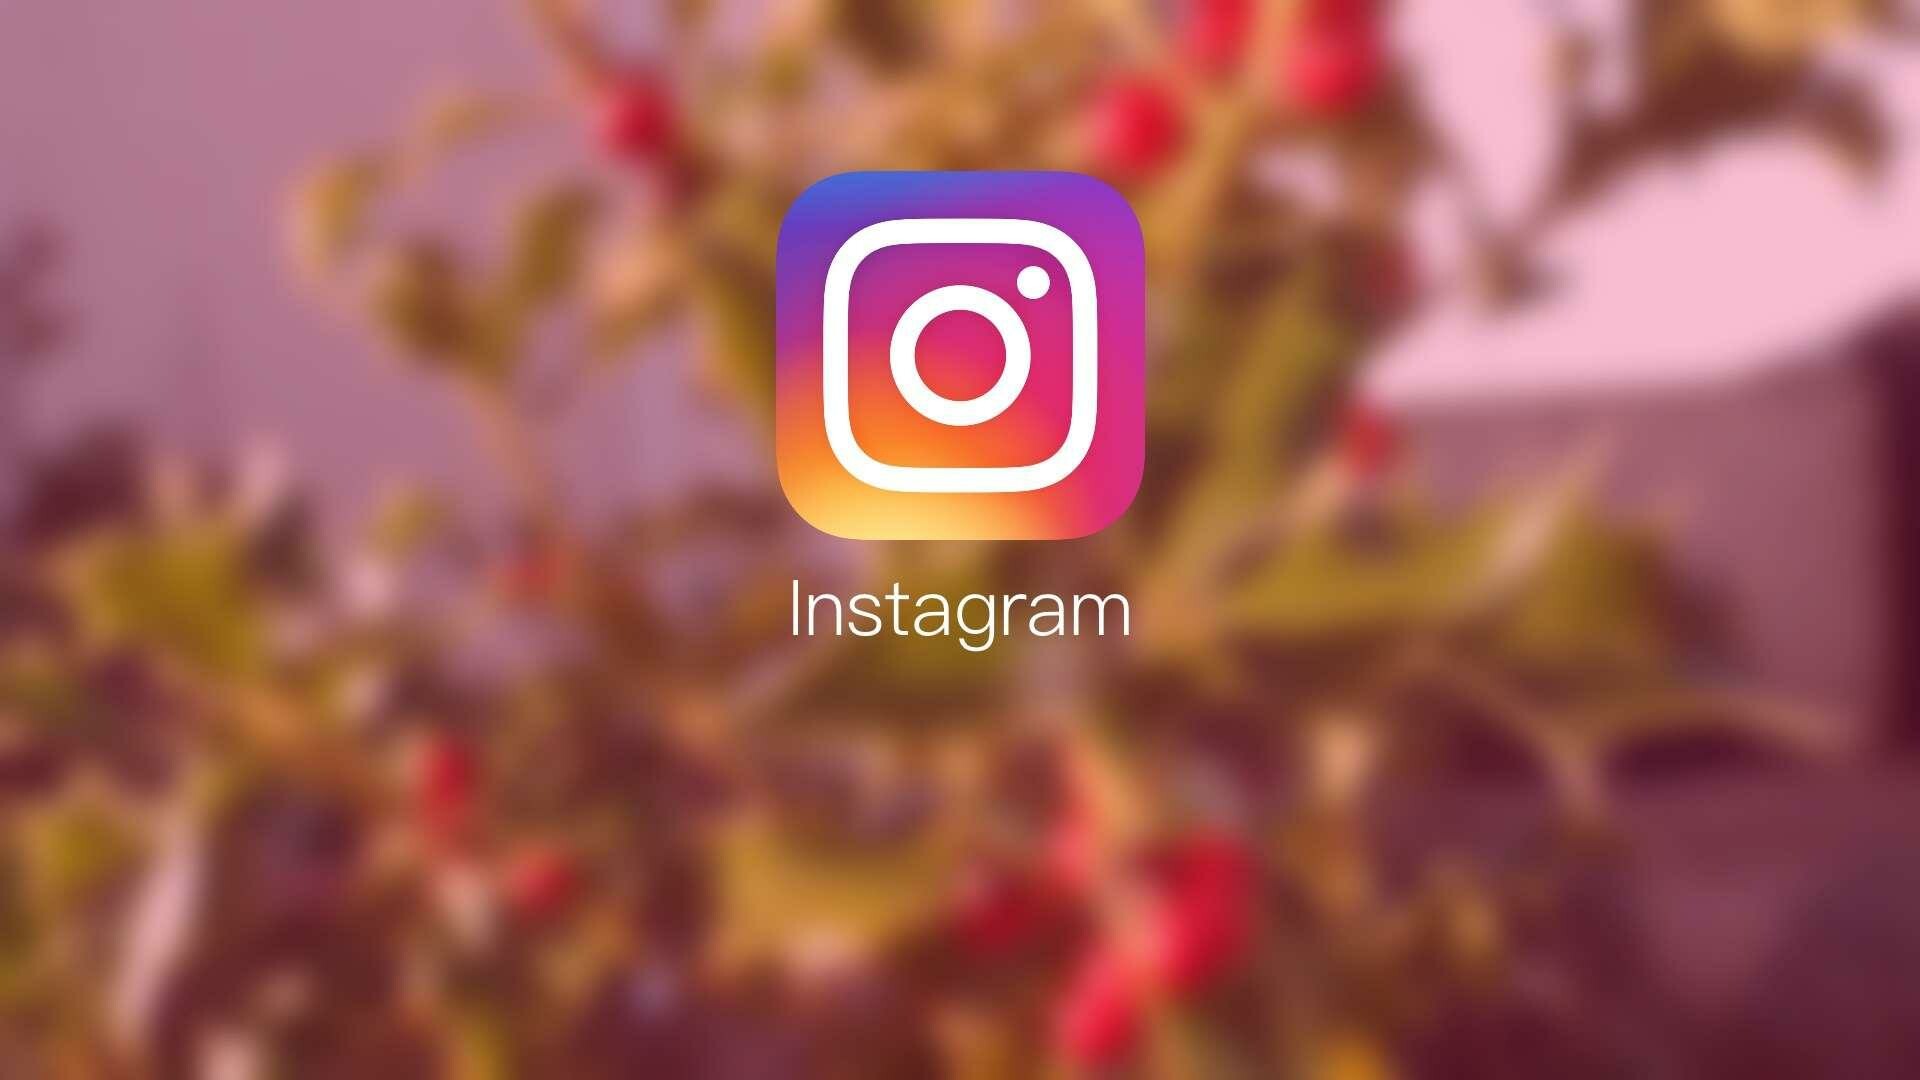 Instagram: Networking service, Used for sharing a photo or video. 1920x1080 Full HD Wallpaper.